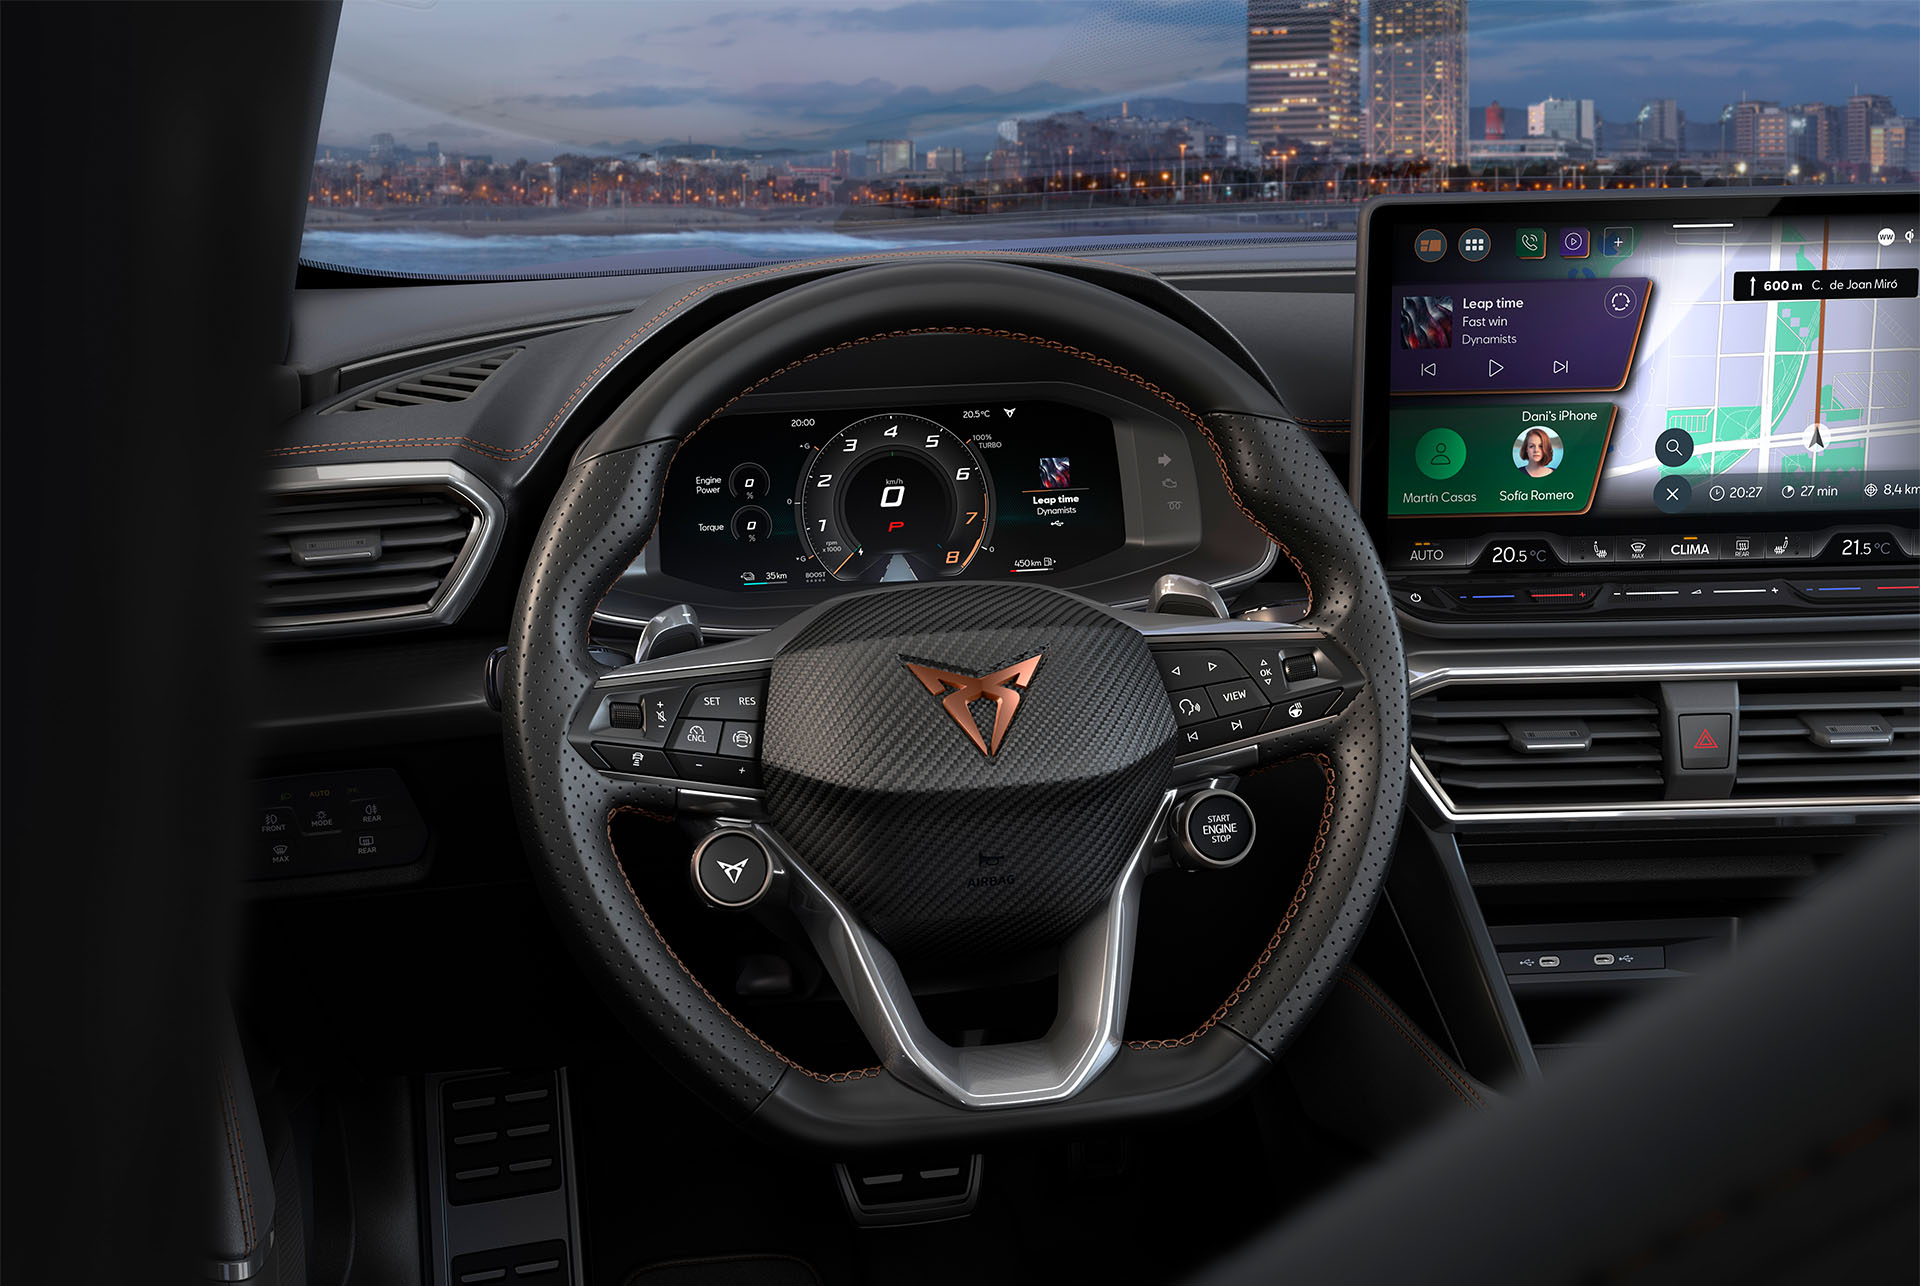 CUPRA steering wheel with logo, copper stitching, satellite buttons and integrated heating. Barcelona skyline and infotainment screen.